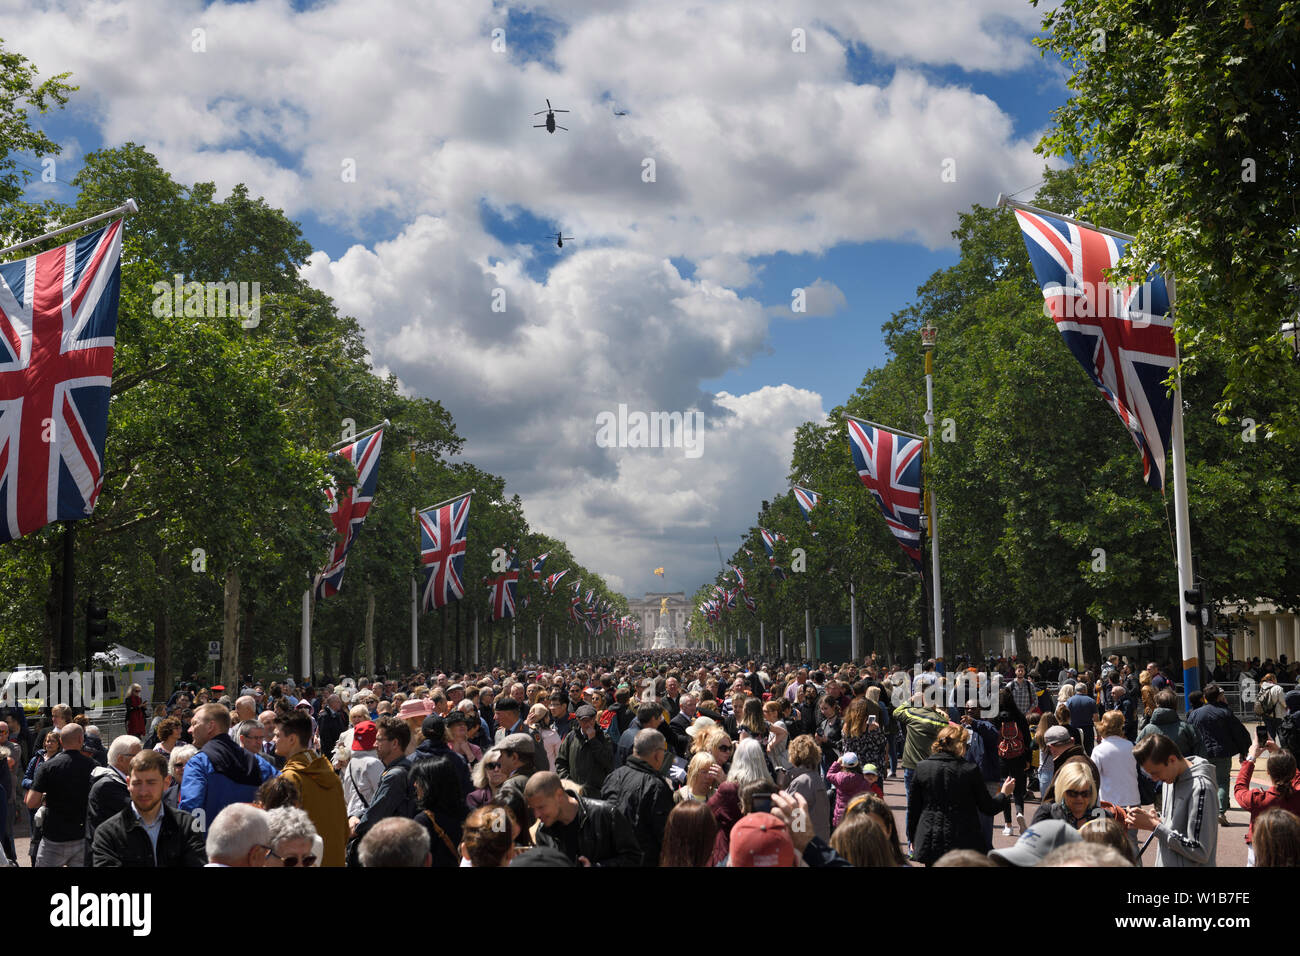 Helicopter flypast at The Mall with Union Jack flags and crowds for Trooping the Colour 2019 London England at Buckingham Palace Stock Photo